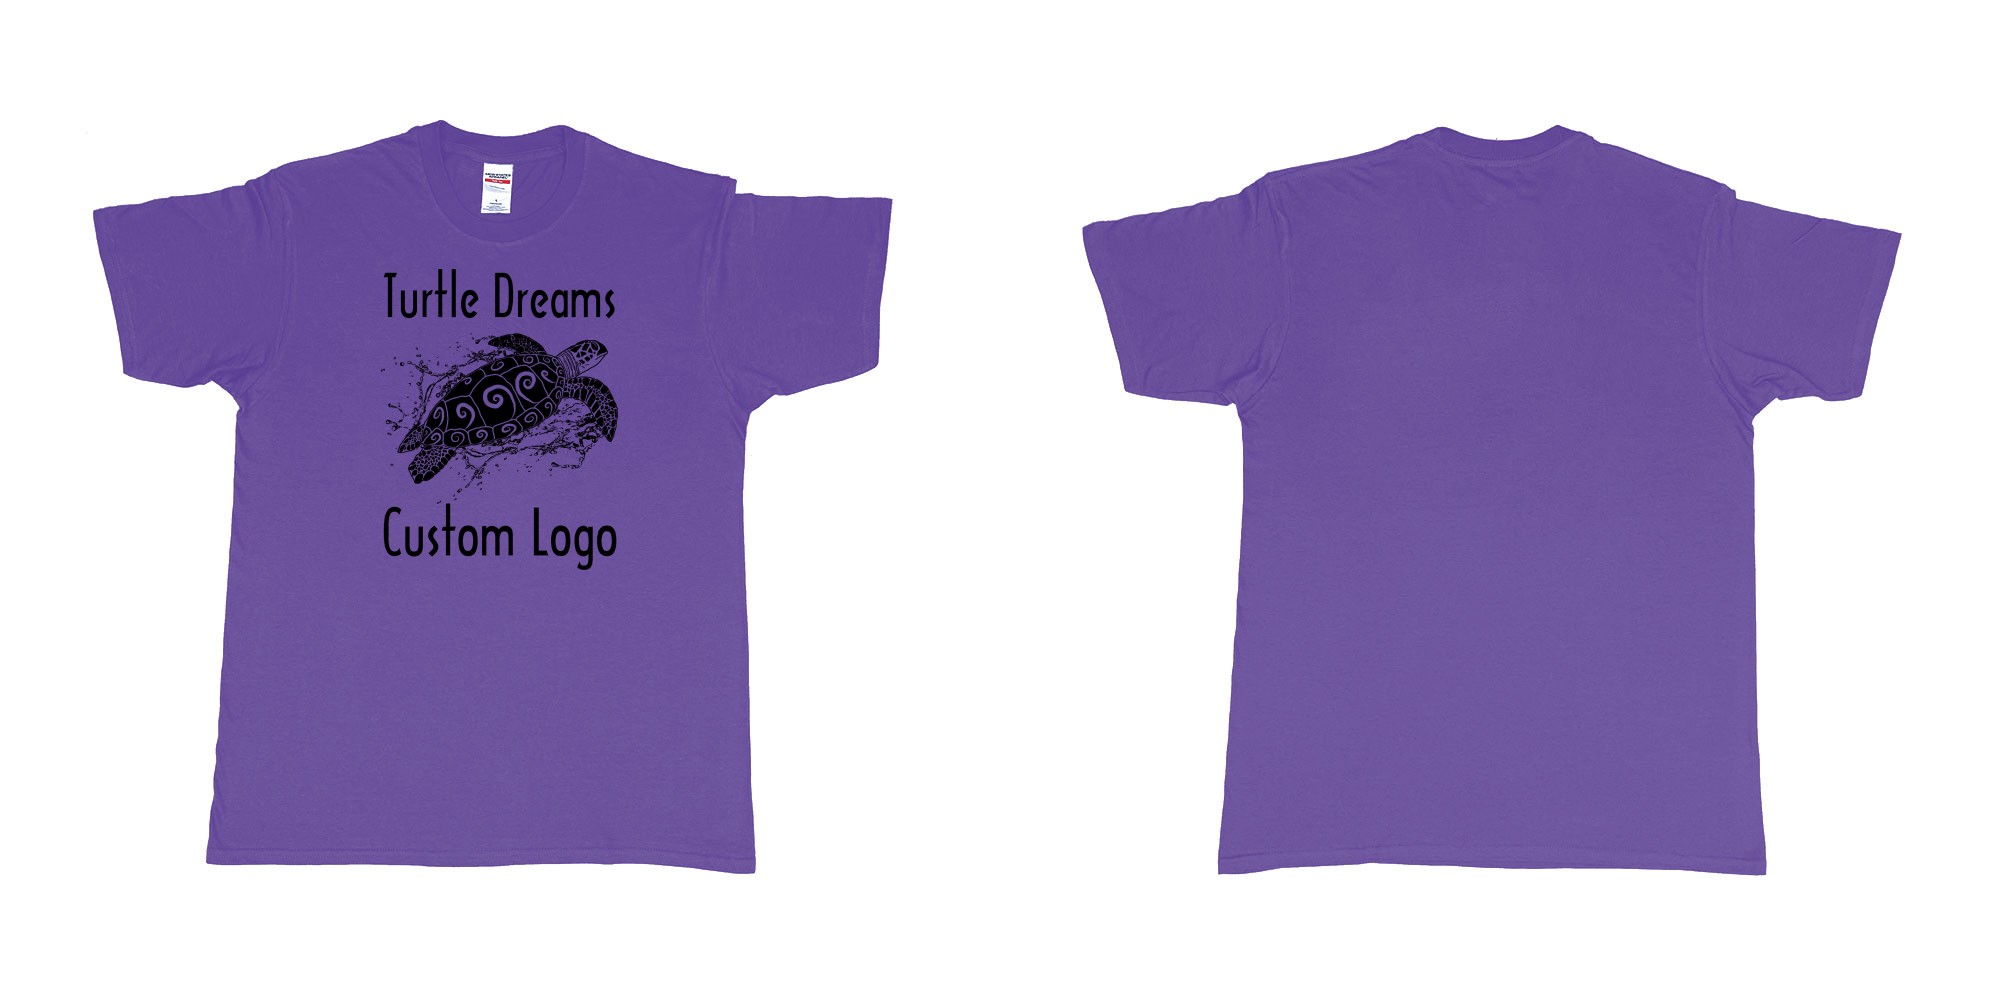 Custom tshirt design turtle dreams custom logo design in fabric color purple choice your own text made in Bali by The Pirate Way